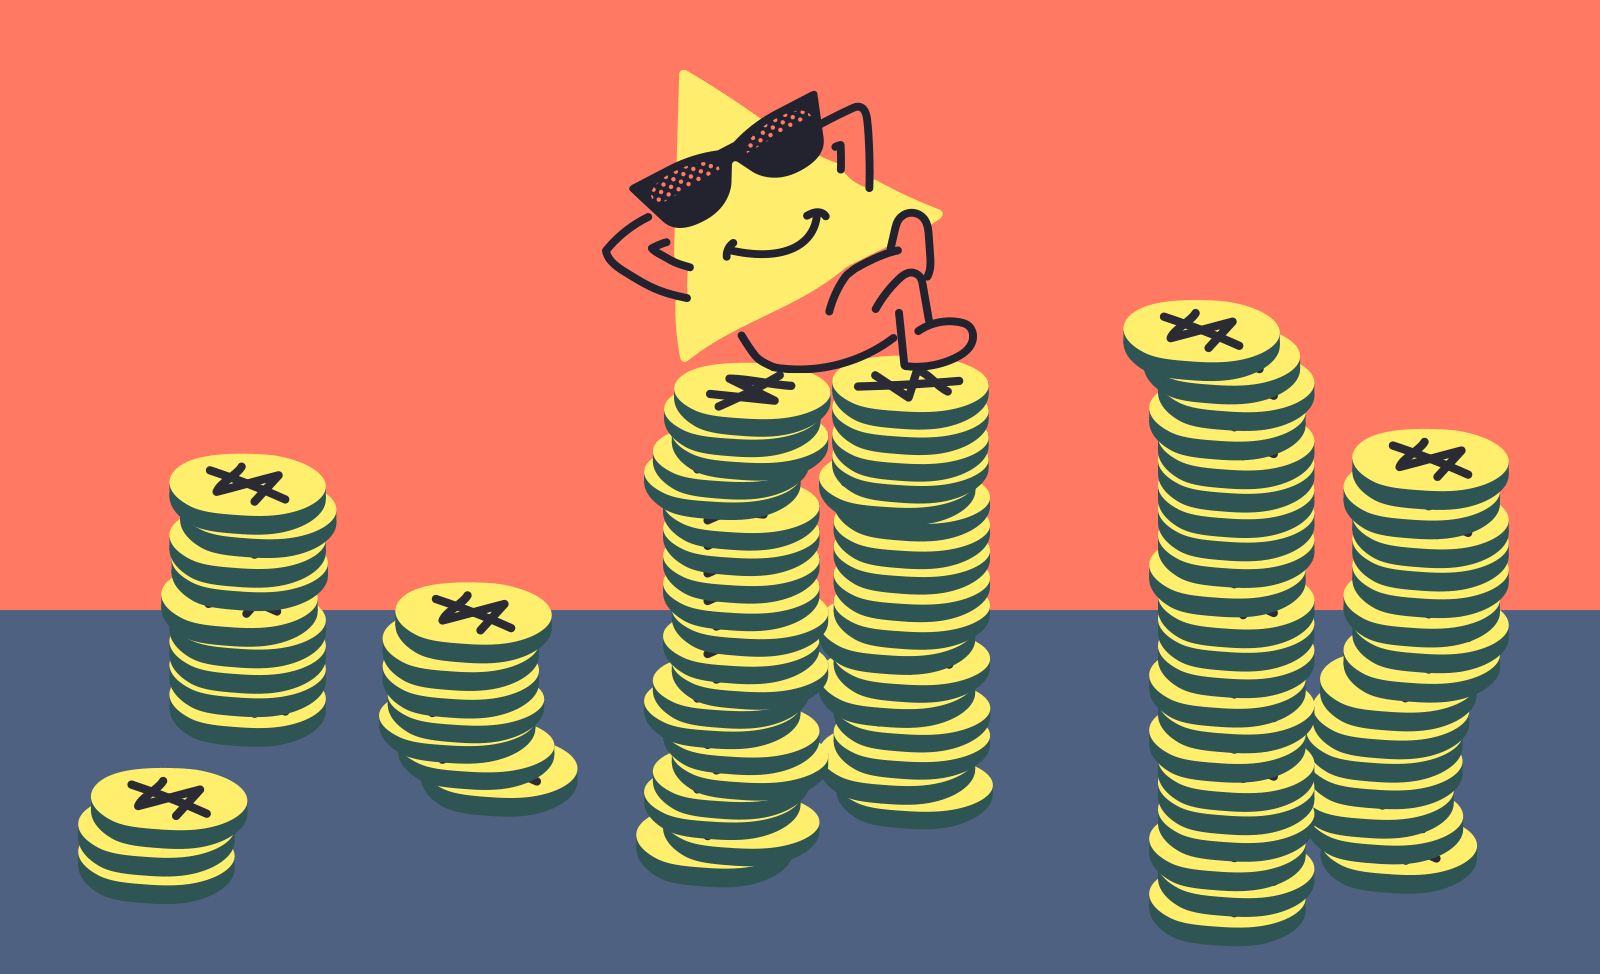 "Zap chilling with piles of coins"